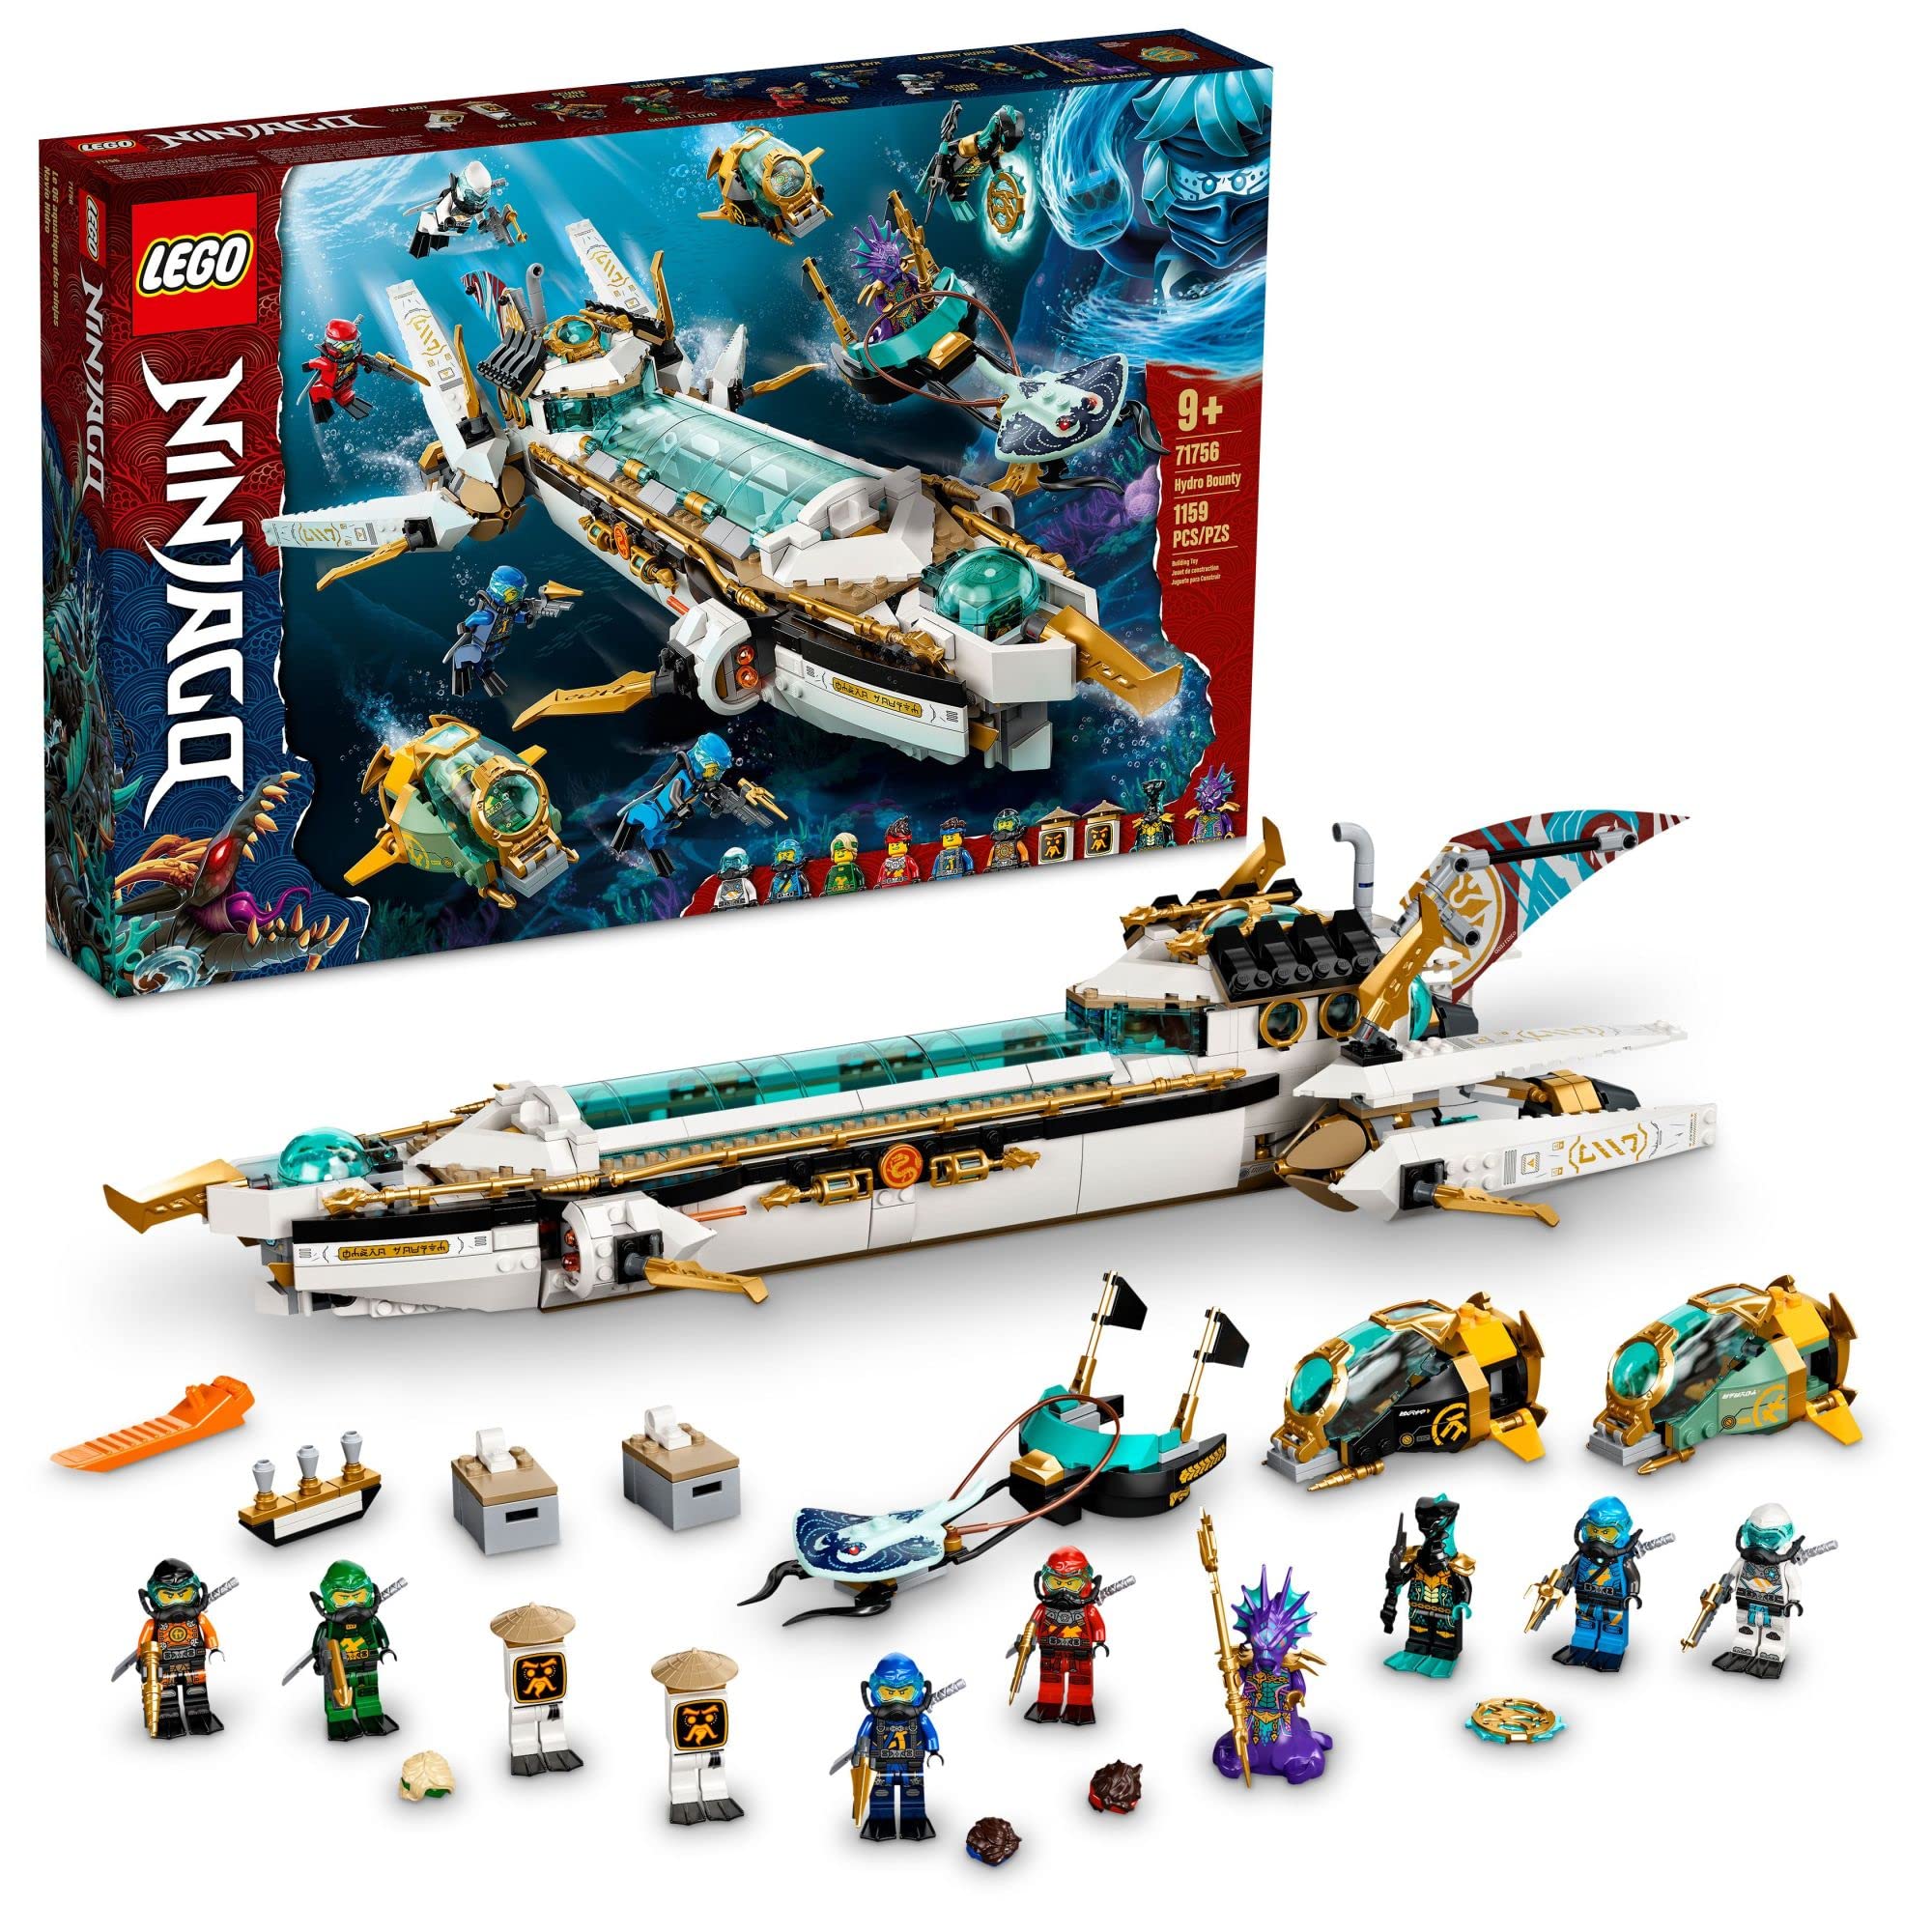 LEGO NINJAGO Hydro Bounty Building Set, 71756 Submarine Toy with Kai and NYA Minifigures, Ninja Toys, Gifts, Presents for Kids, Boys, Girls Age 9 Plus Years Old